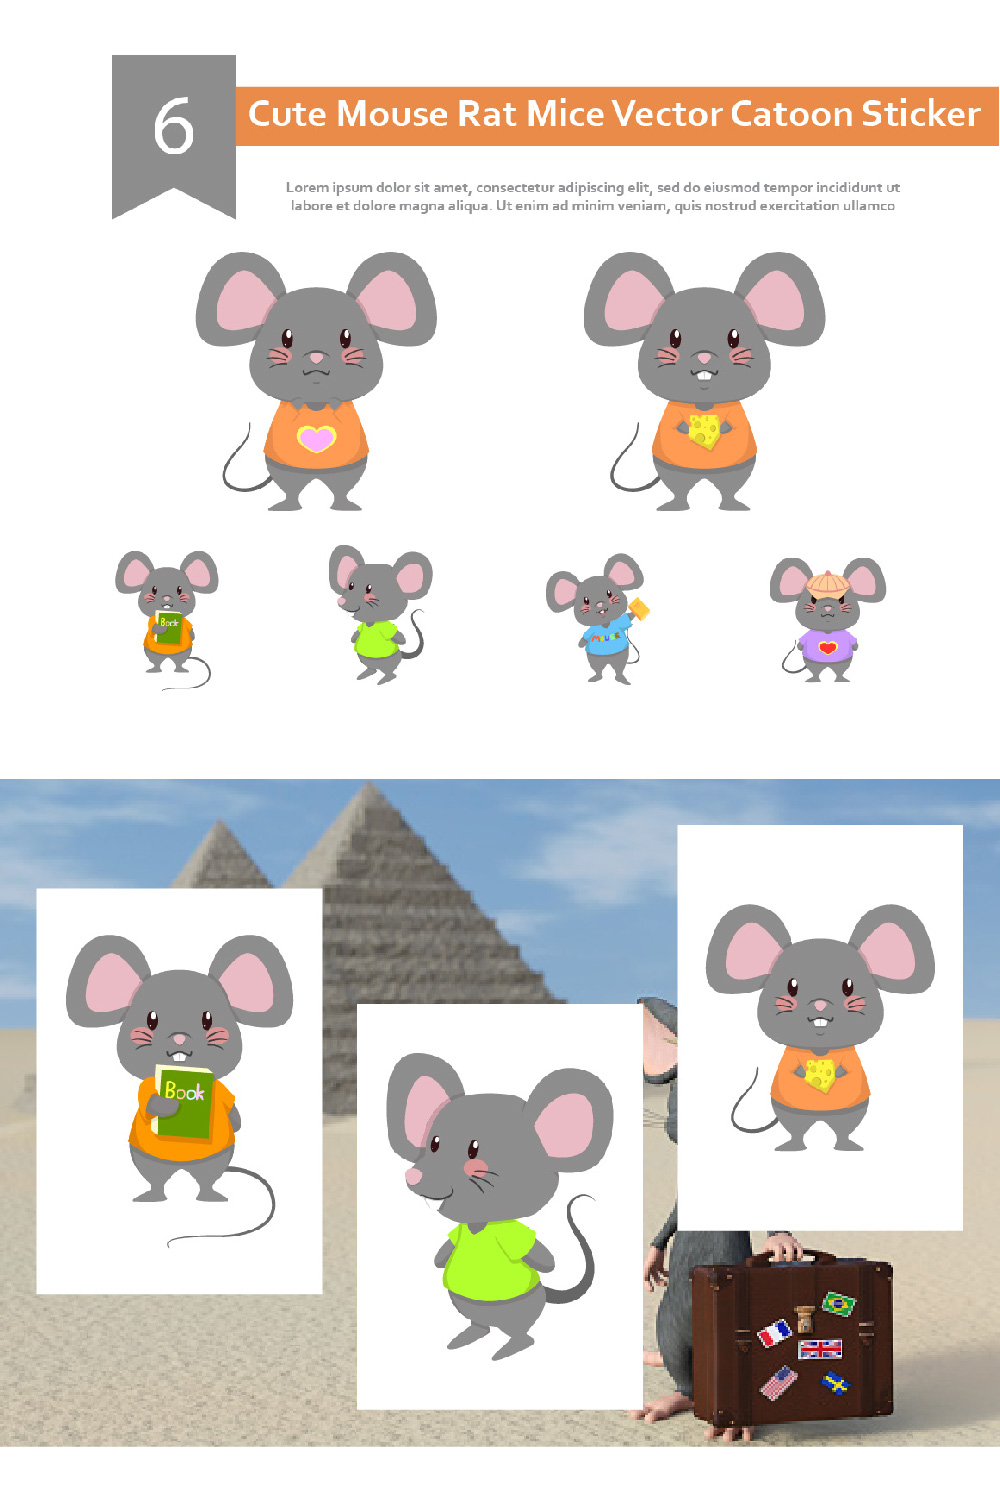 Here you will find the example of all Mouse Vector Cartoon Sticker.